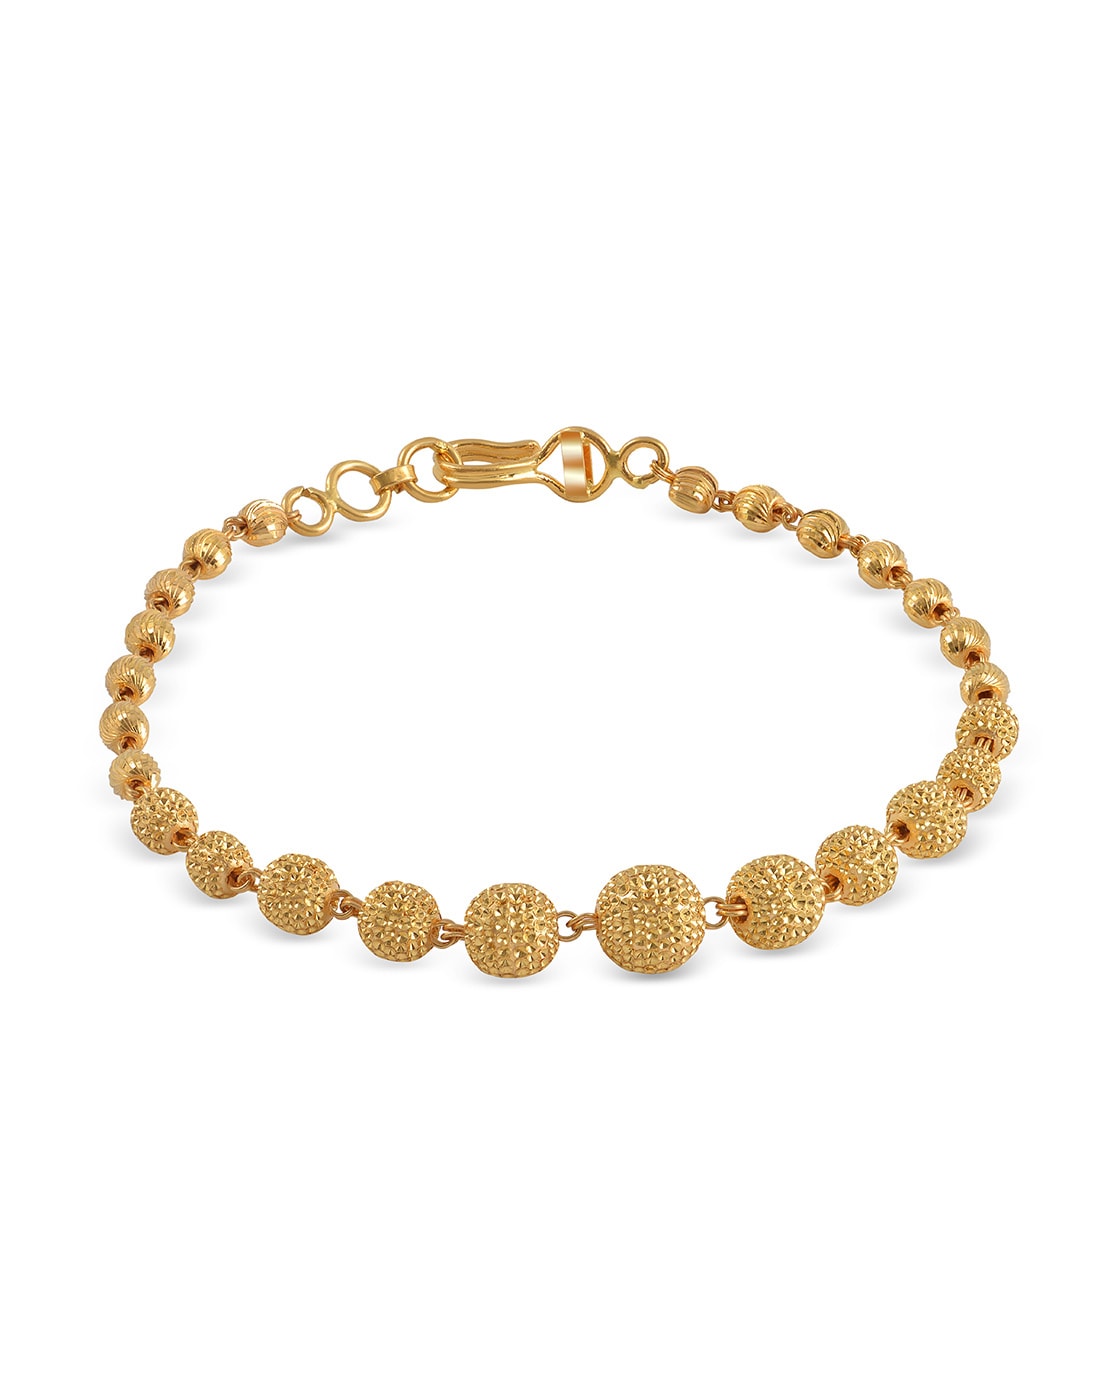 A Fancy And Gold Plated Bracelet For A Woman And Girl Made From American  Beads